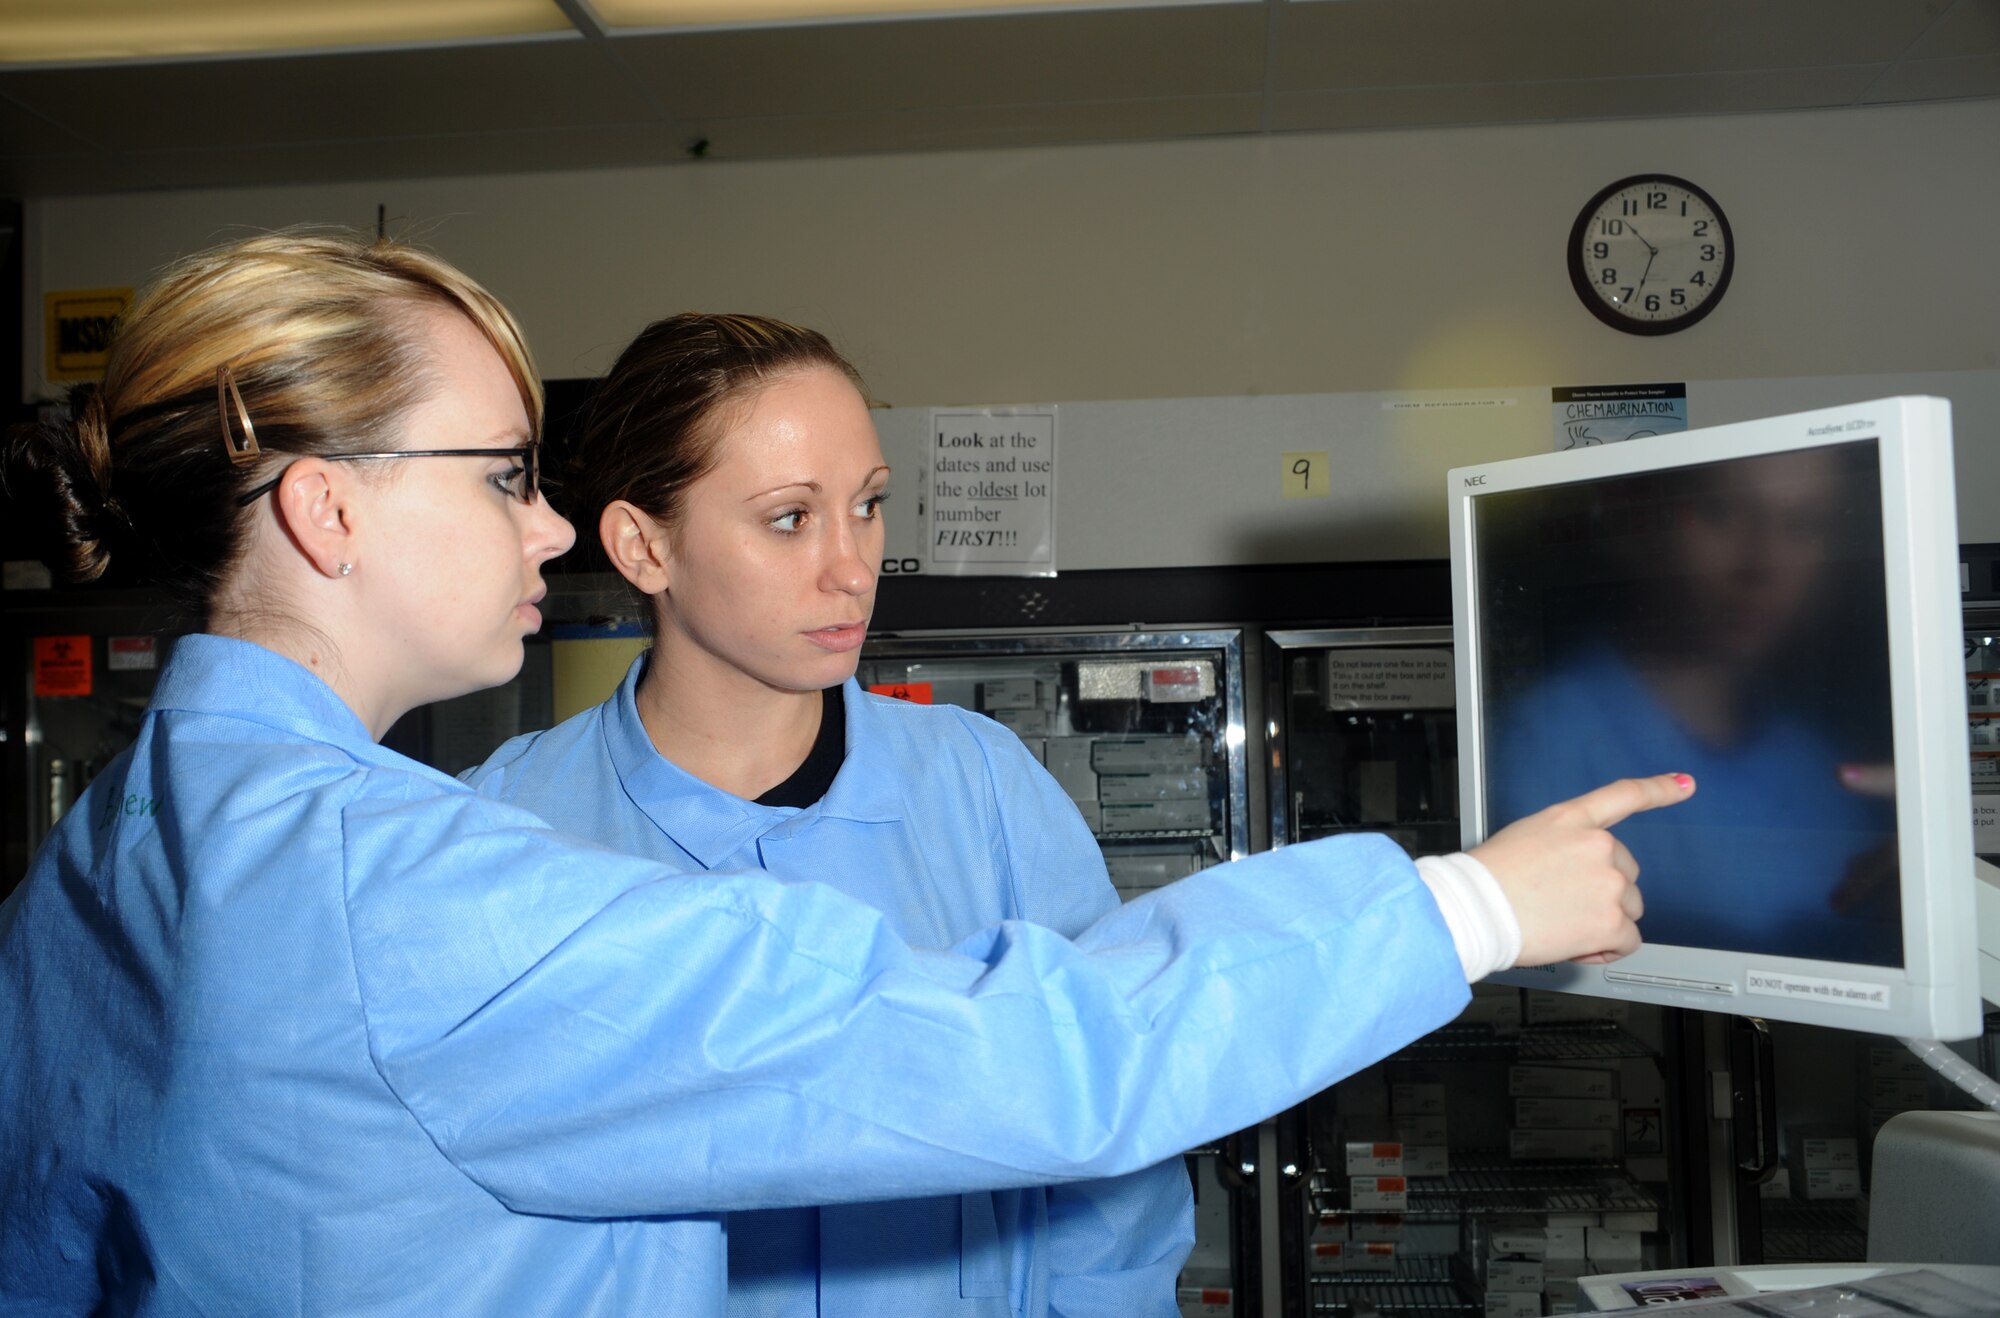 ELMENDORF AIR FORCE BASE, Alaska-- Senior Airman Leslie Balliew and Airman 1st Class Heather Long of 3 Medical Support Squadron examine test results on April 15, 2009. Lab technicians are vital to our health care, providing us critical information by detecting unknown health problems and aiding in the diagnosis and treatment of known conditions. (U.S. Air Force photo by Airman First Class Kristin High)